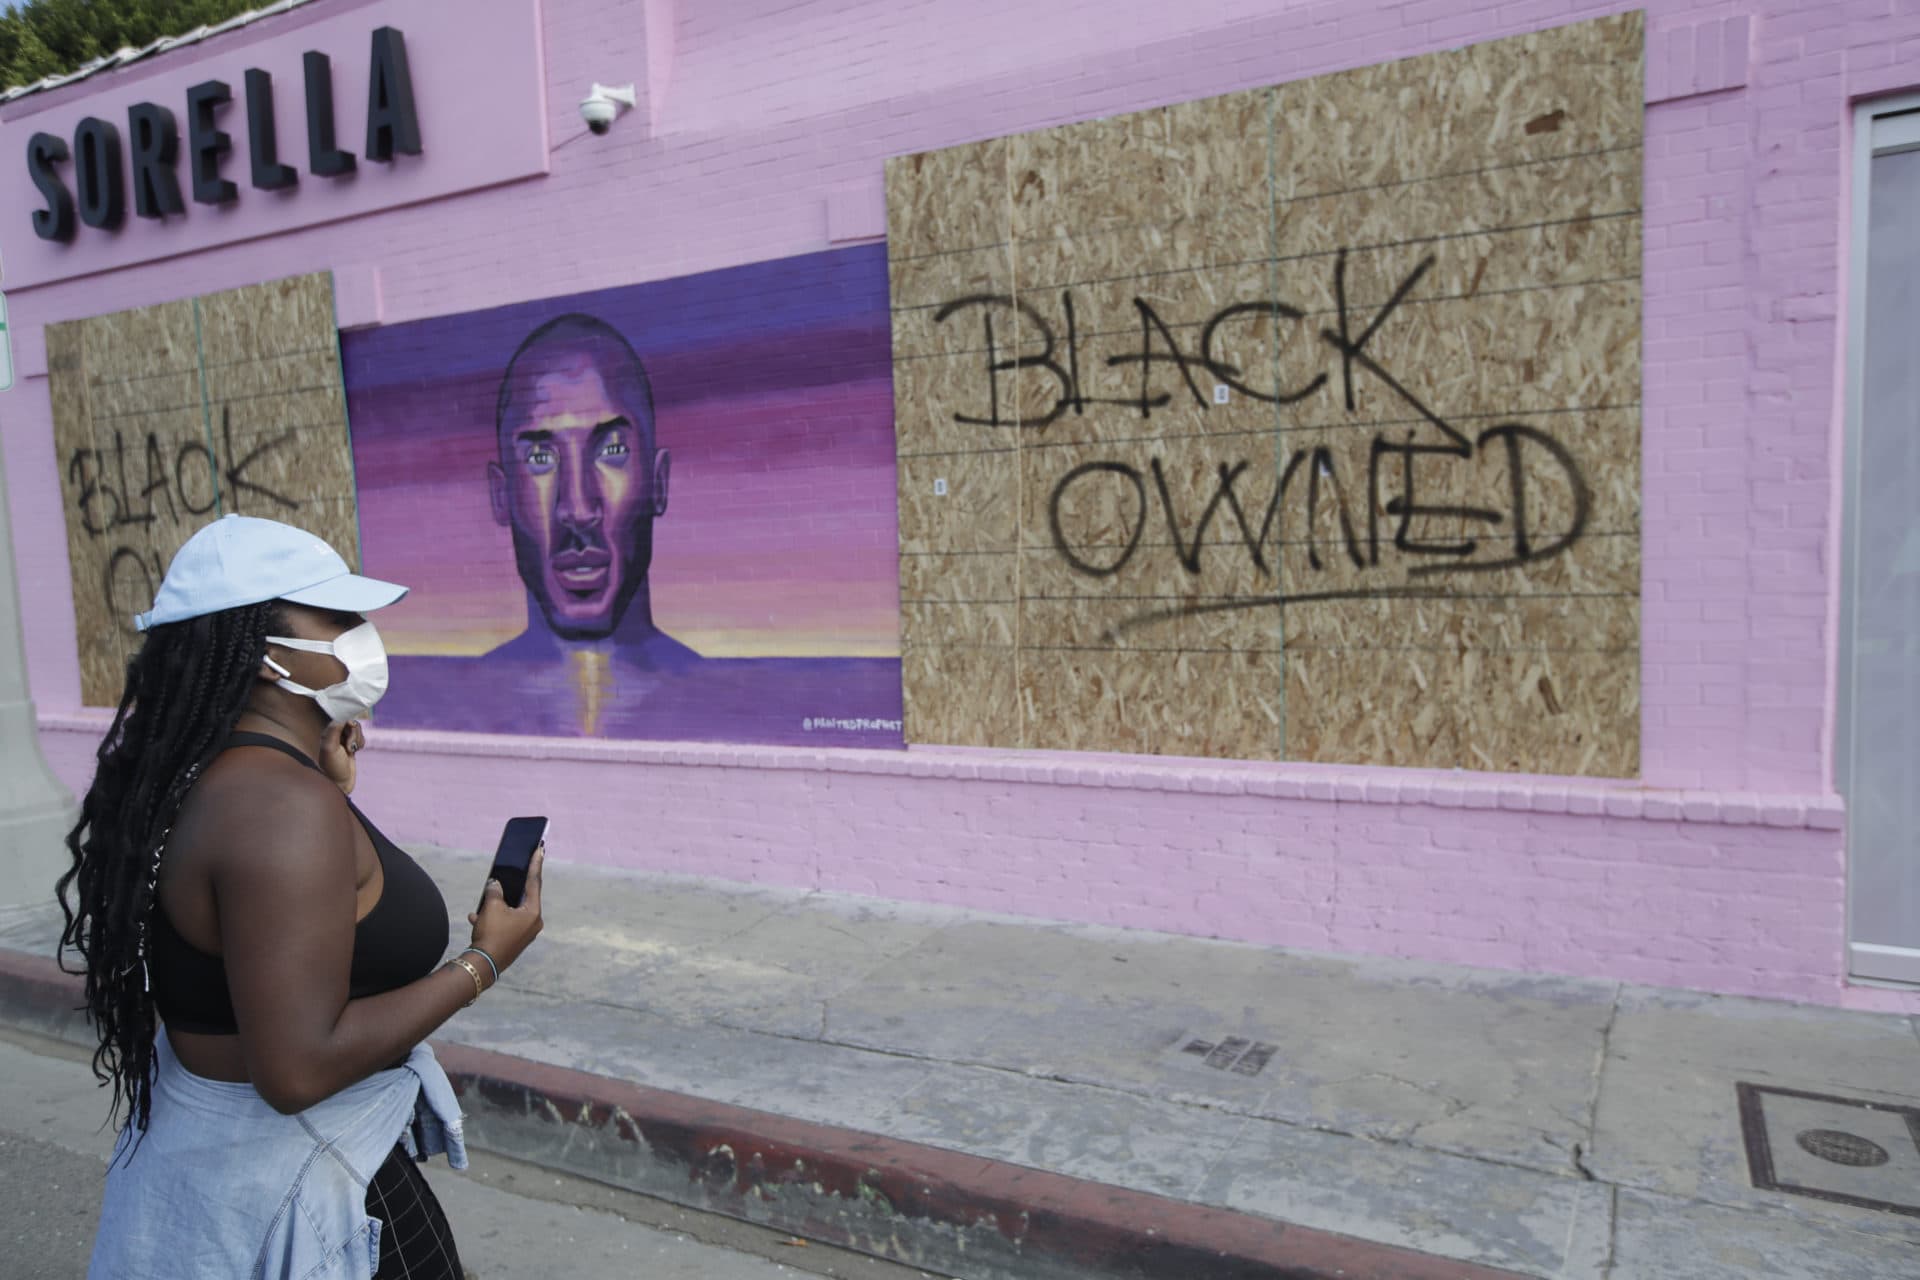 A woman looks at a boarded up store front, Sunday, May 31, 2020, in Los Angeles, following a night of unrest and protests over the death of George Floyd, a black man who was in police custody in Minneapolis. Floyd died after being restrained by Minneapolis police officers on May 25. (AP Photo/Marcio Jose Sanchez)